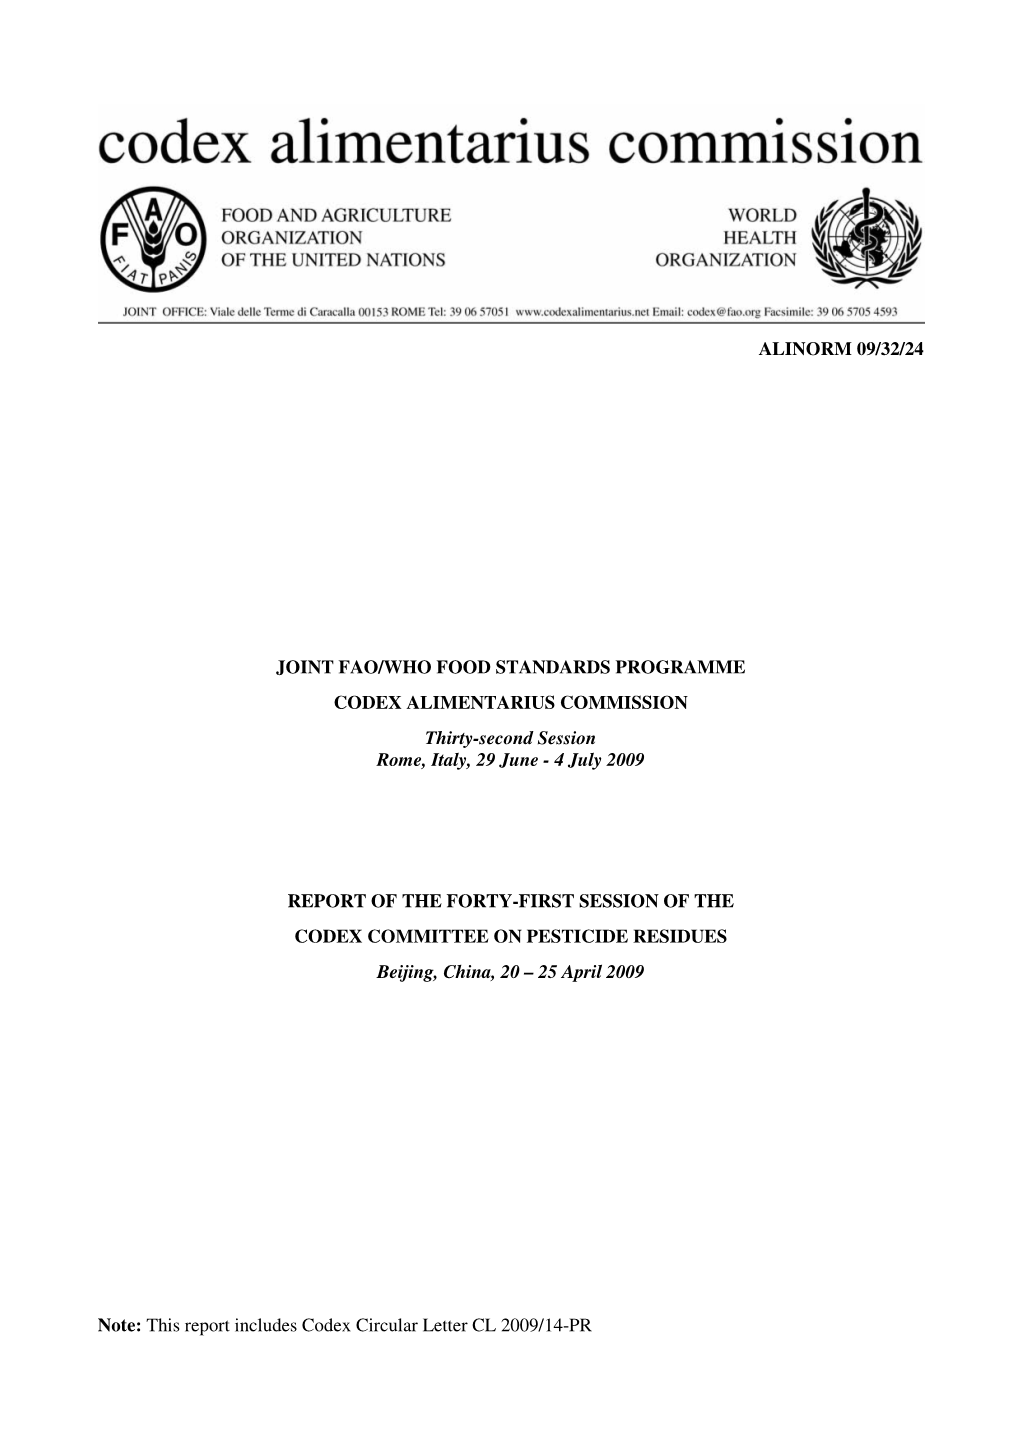 Alinorm 09/32/24 Joint Fao/Who Food Standards Programme Codex